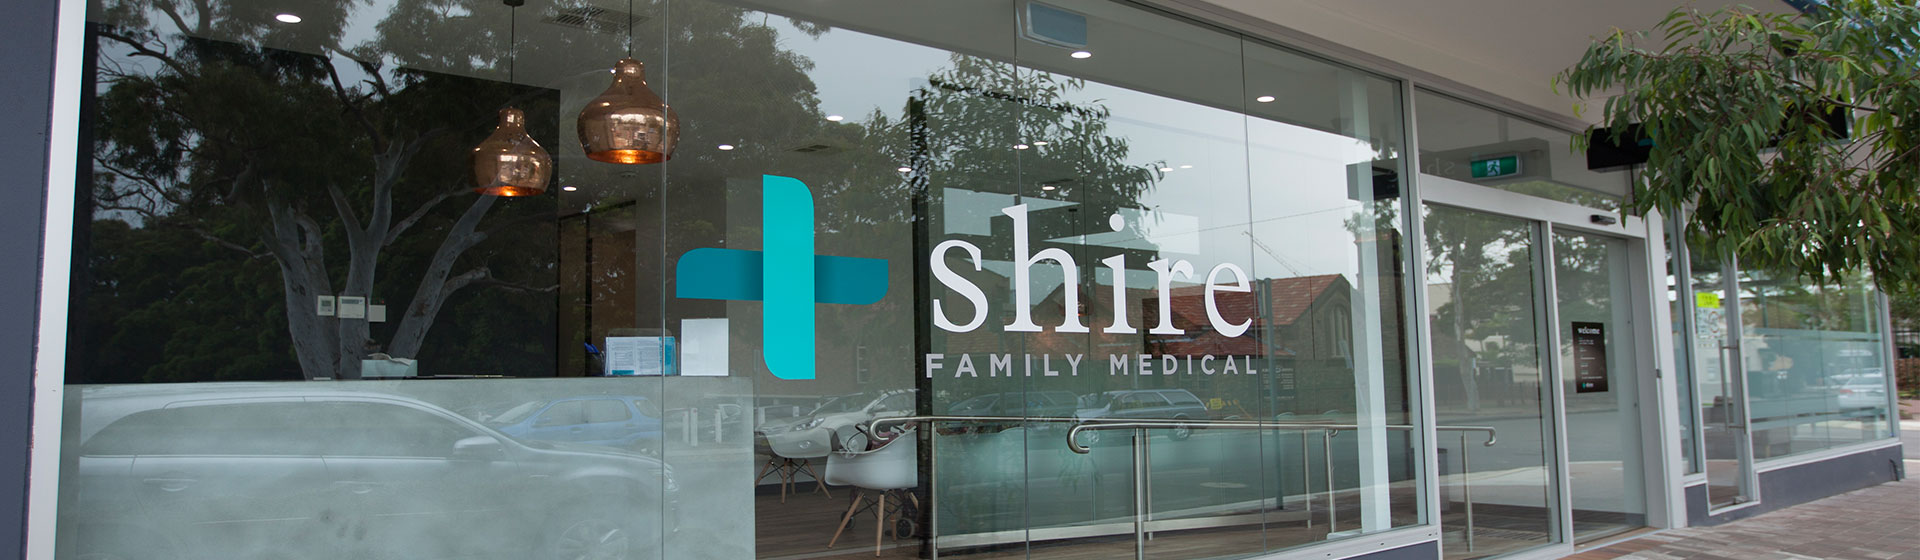 Shire Family Medical - Sutherland Family Doctor